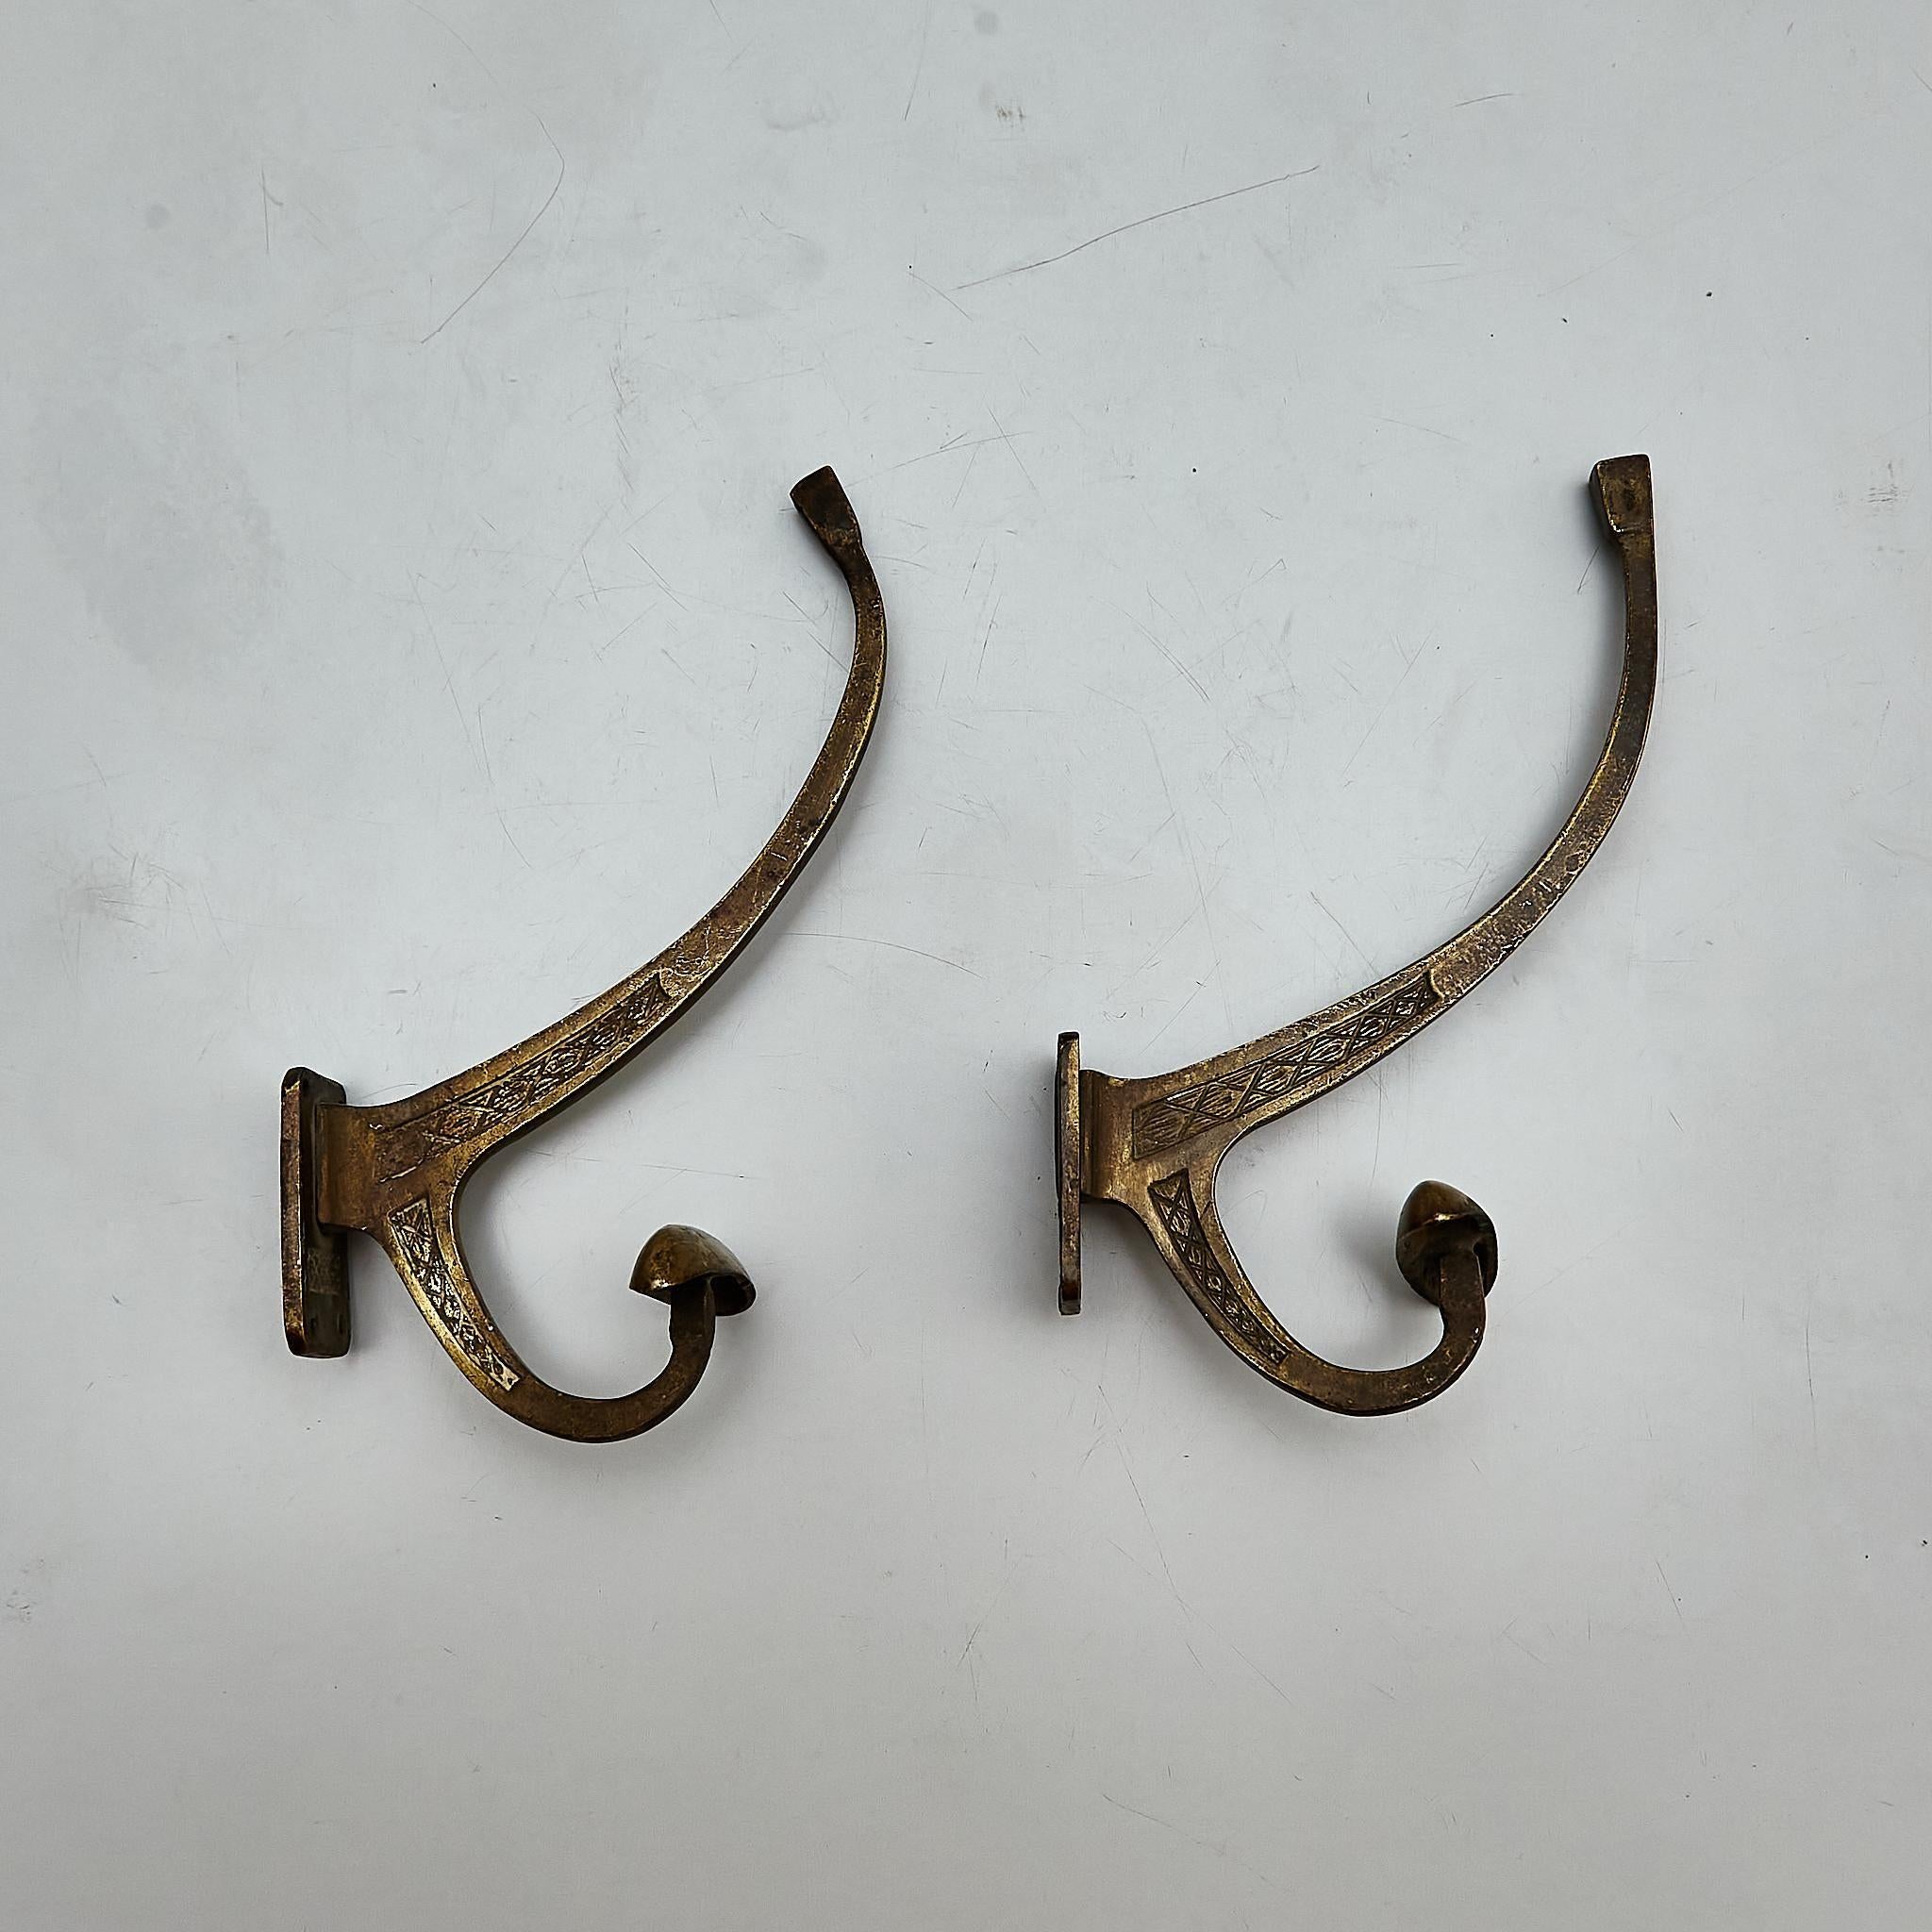 1940s Modernist Metal Coat Hangers with Stunning Patina In Good Condition For Sale In Barcelona, ES